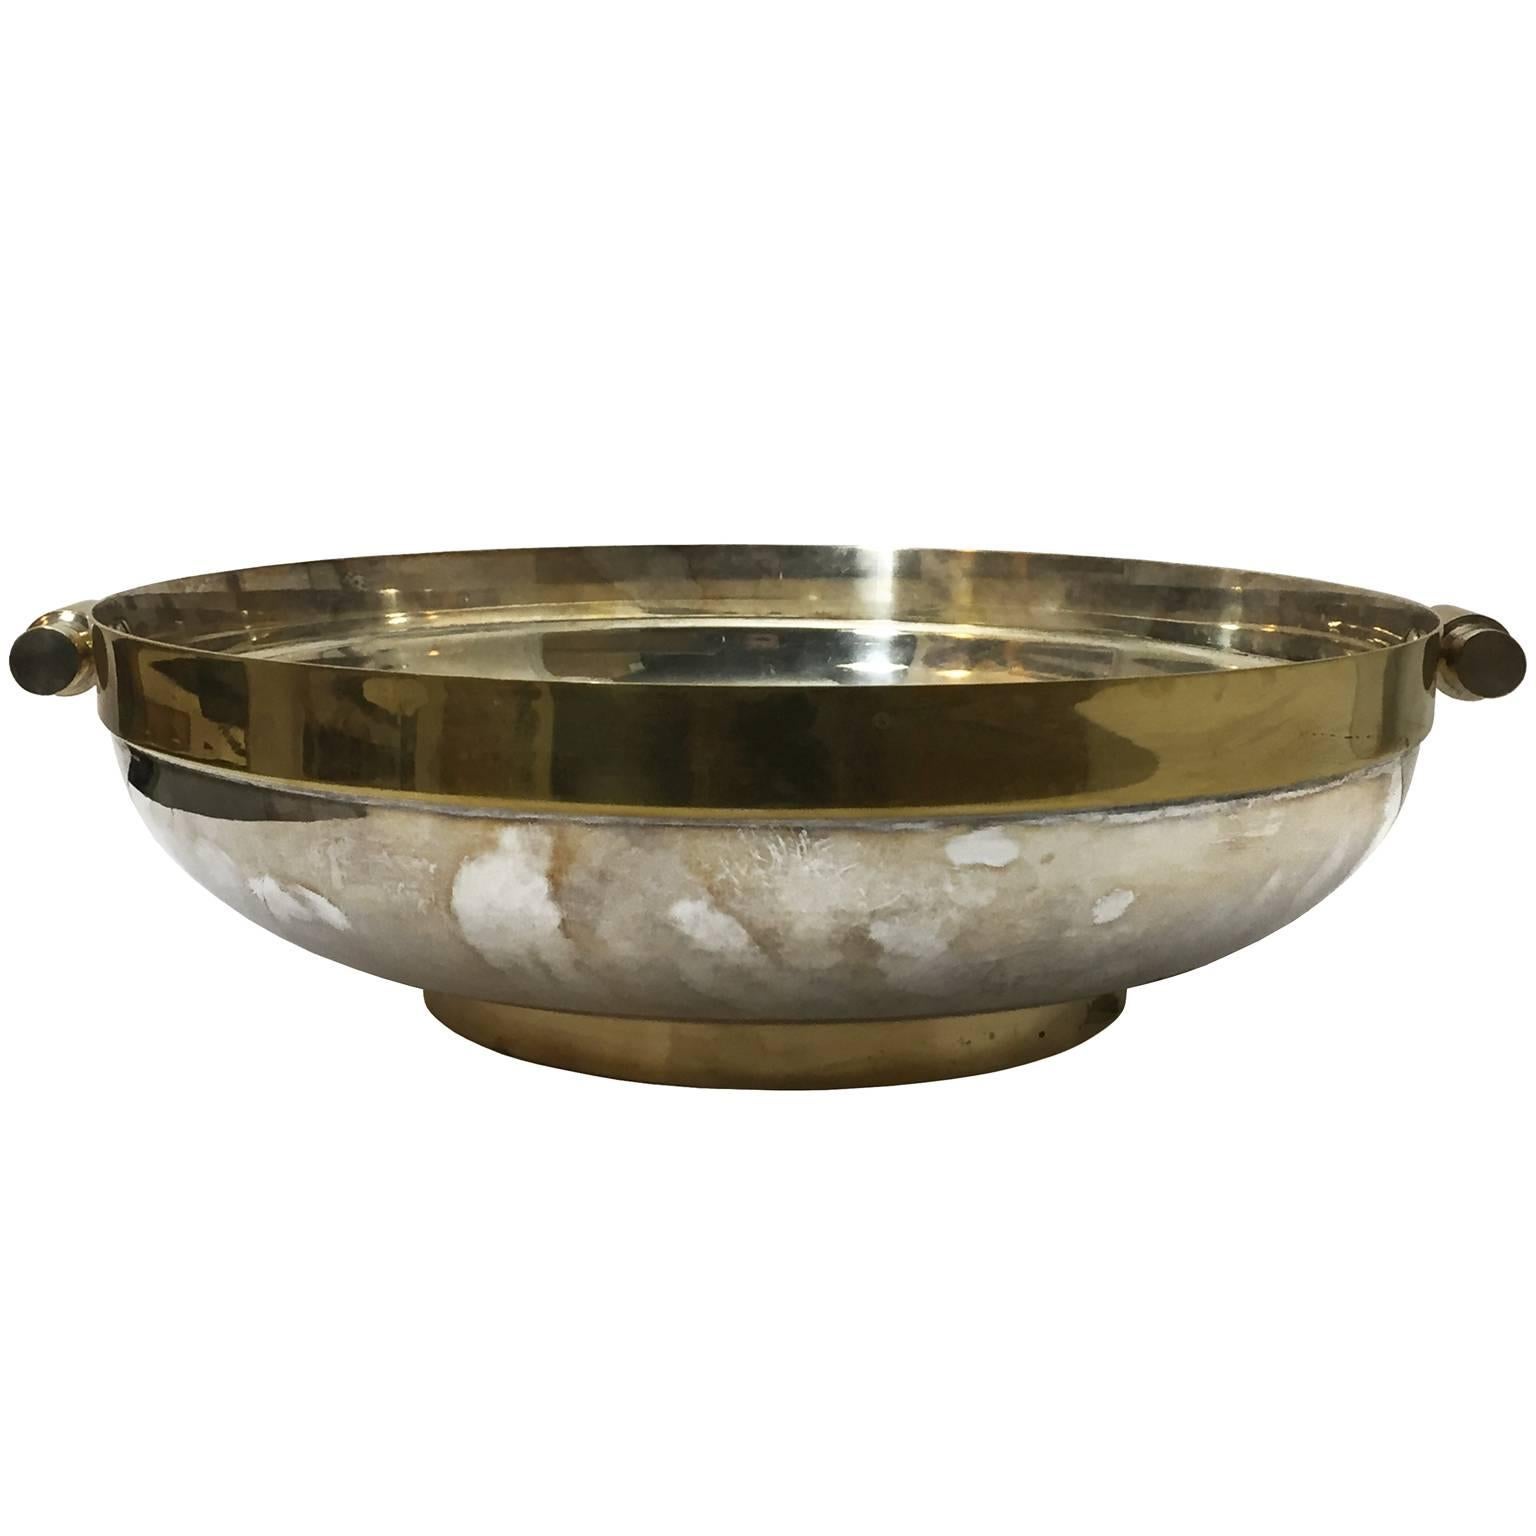 1970s Brass and Nickel Handled Bowl